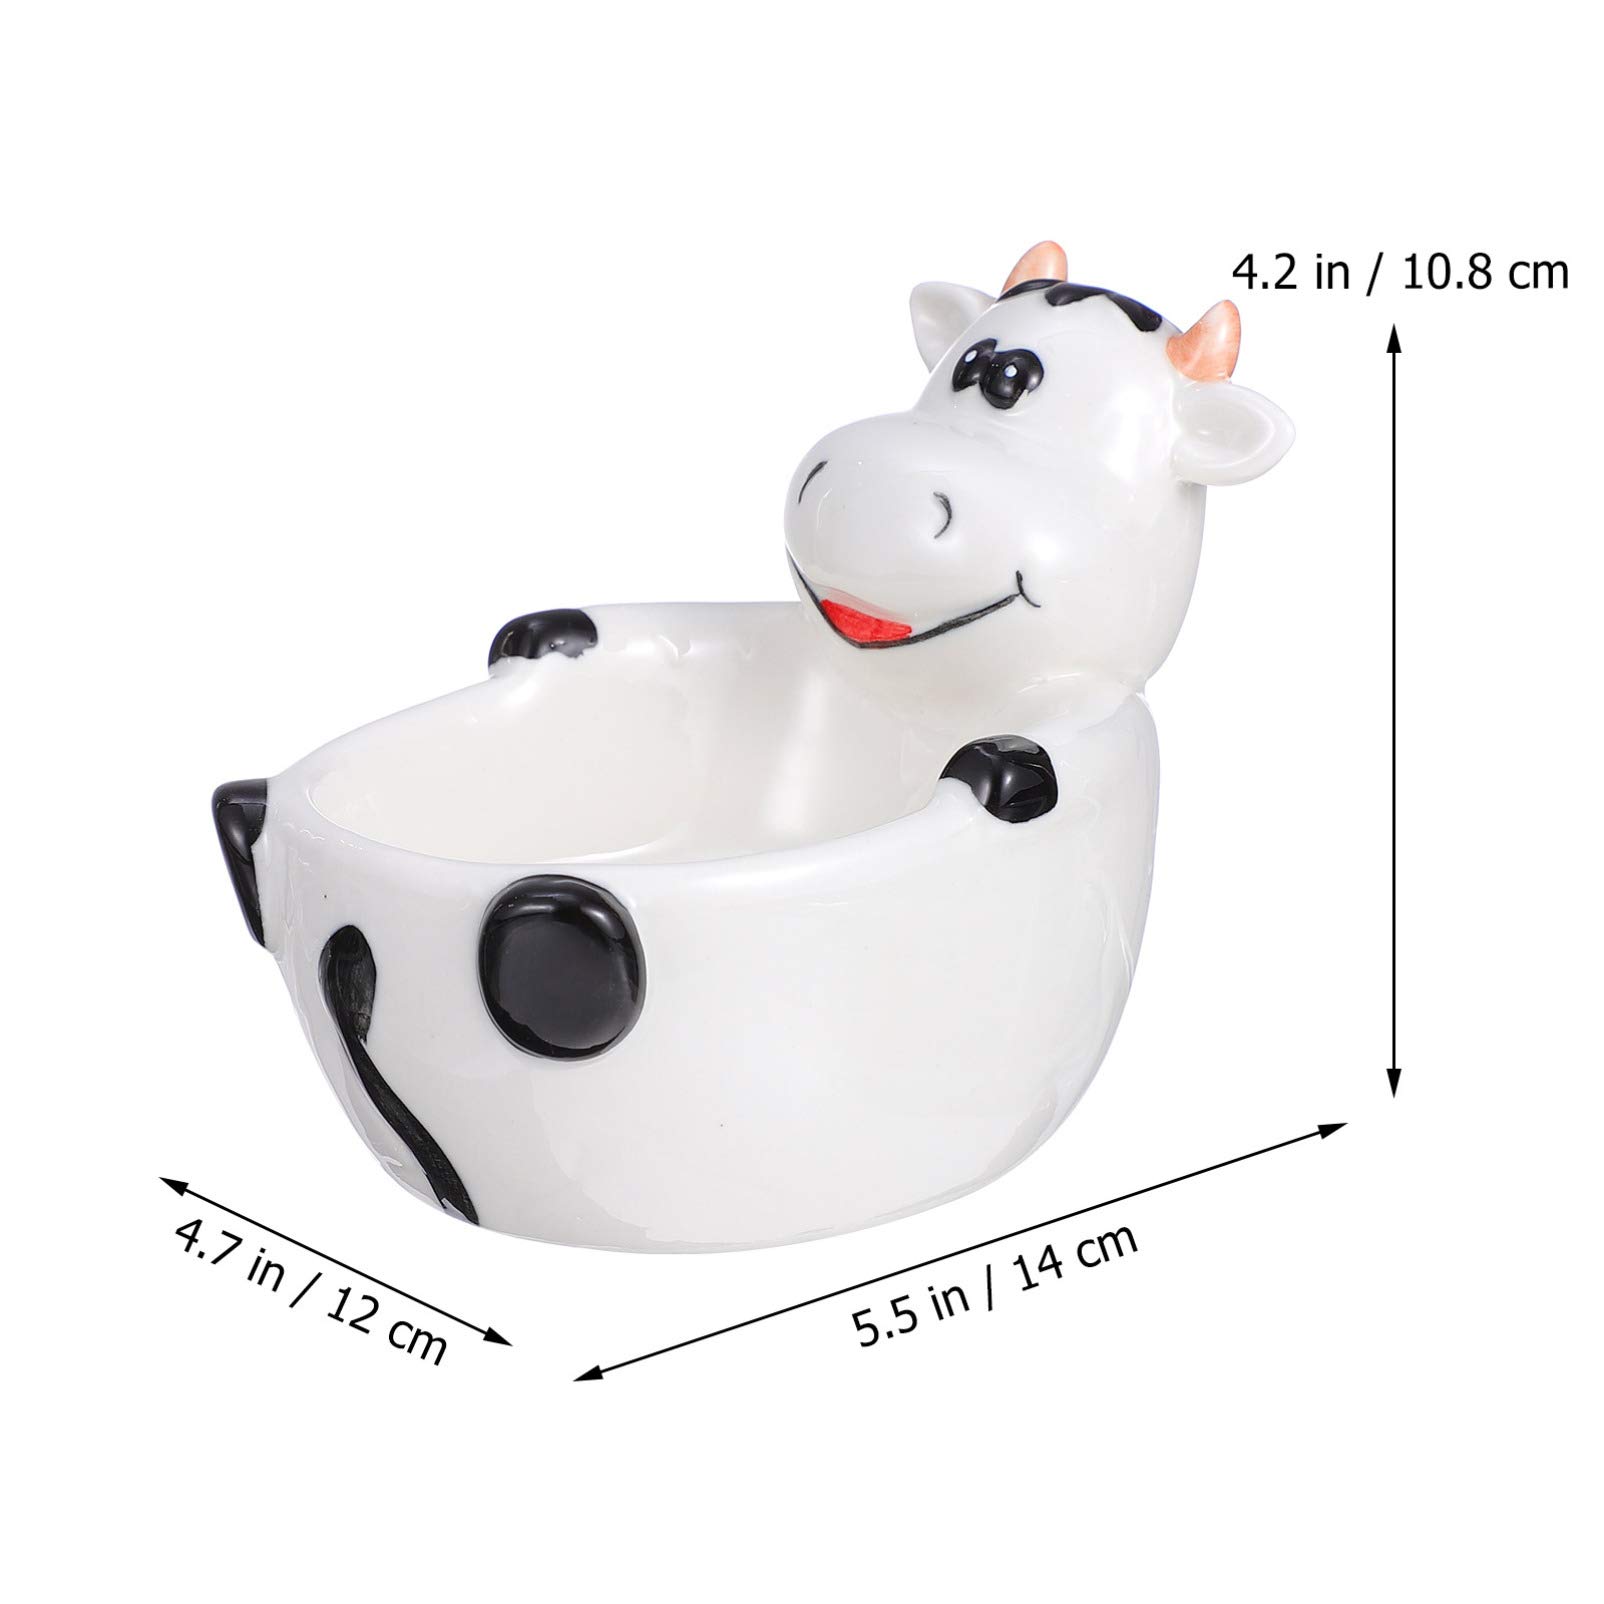 DOITOOL Ceramic Salad Bowl Cereal Bowl Dishes and Plates Creative Fruit Plate Animal Cow Decorative Storage Bowls Porcelain Bowls for Kitchen Bowl for Desserts Candy